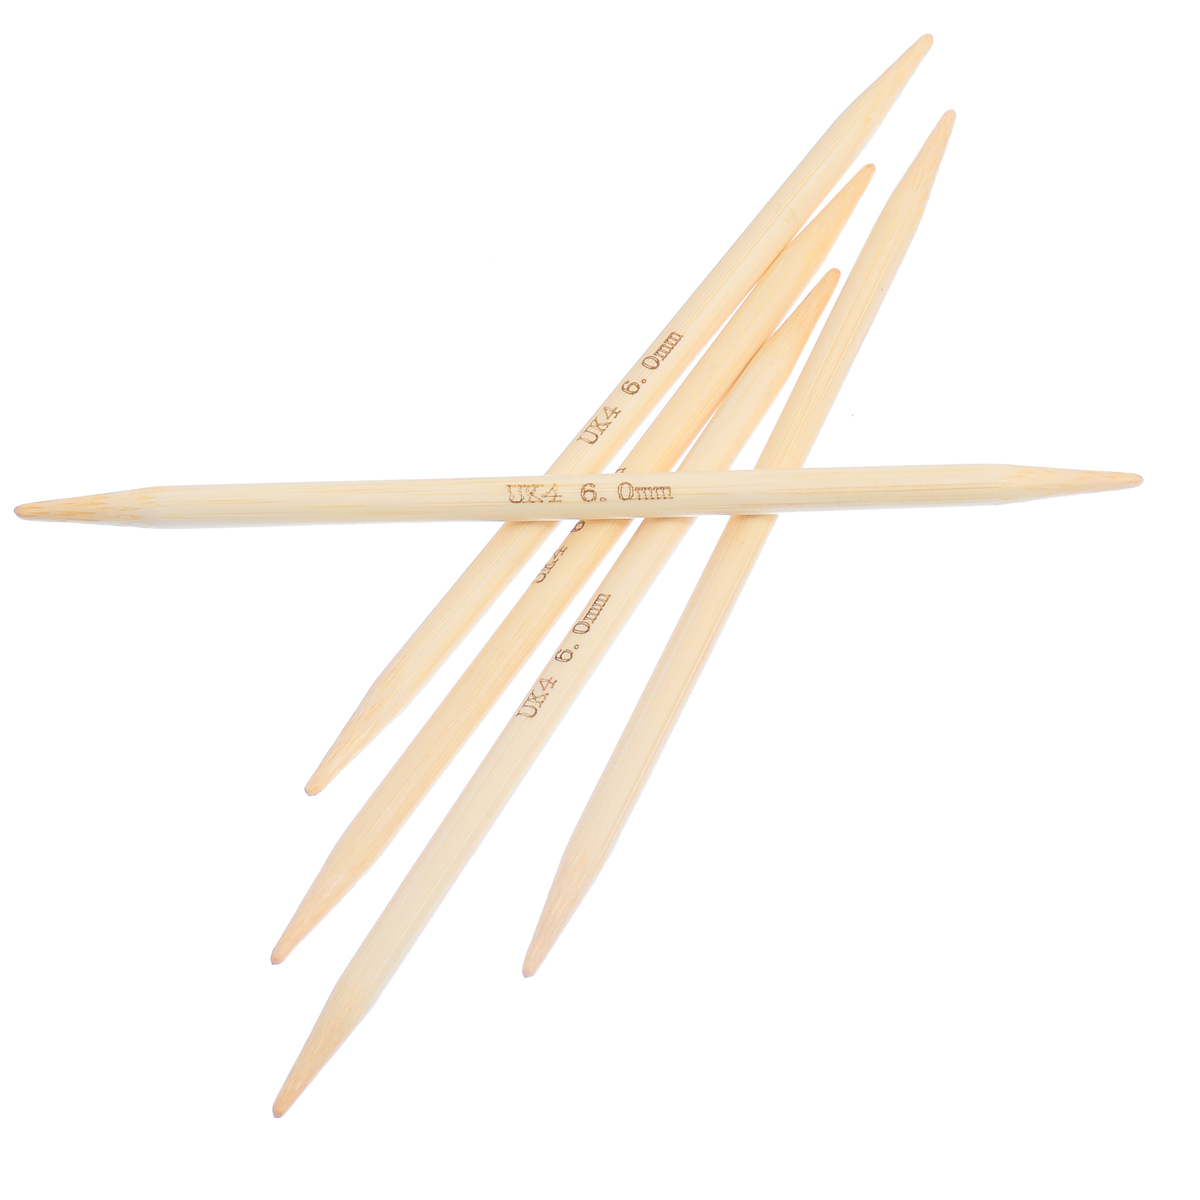 Picture of (UK4 6.0mm) Bamboo Double Pointed Knitting Needles Natural 15cm(5 7/8") long, 1 Set ( 5 PCs/Set)